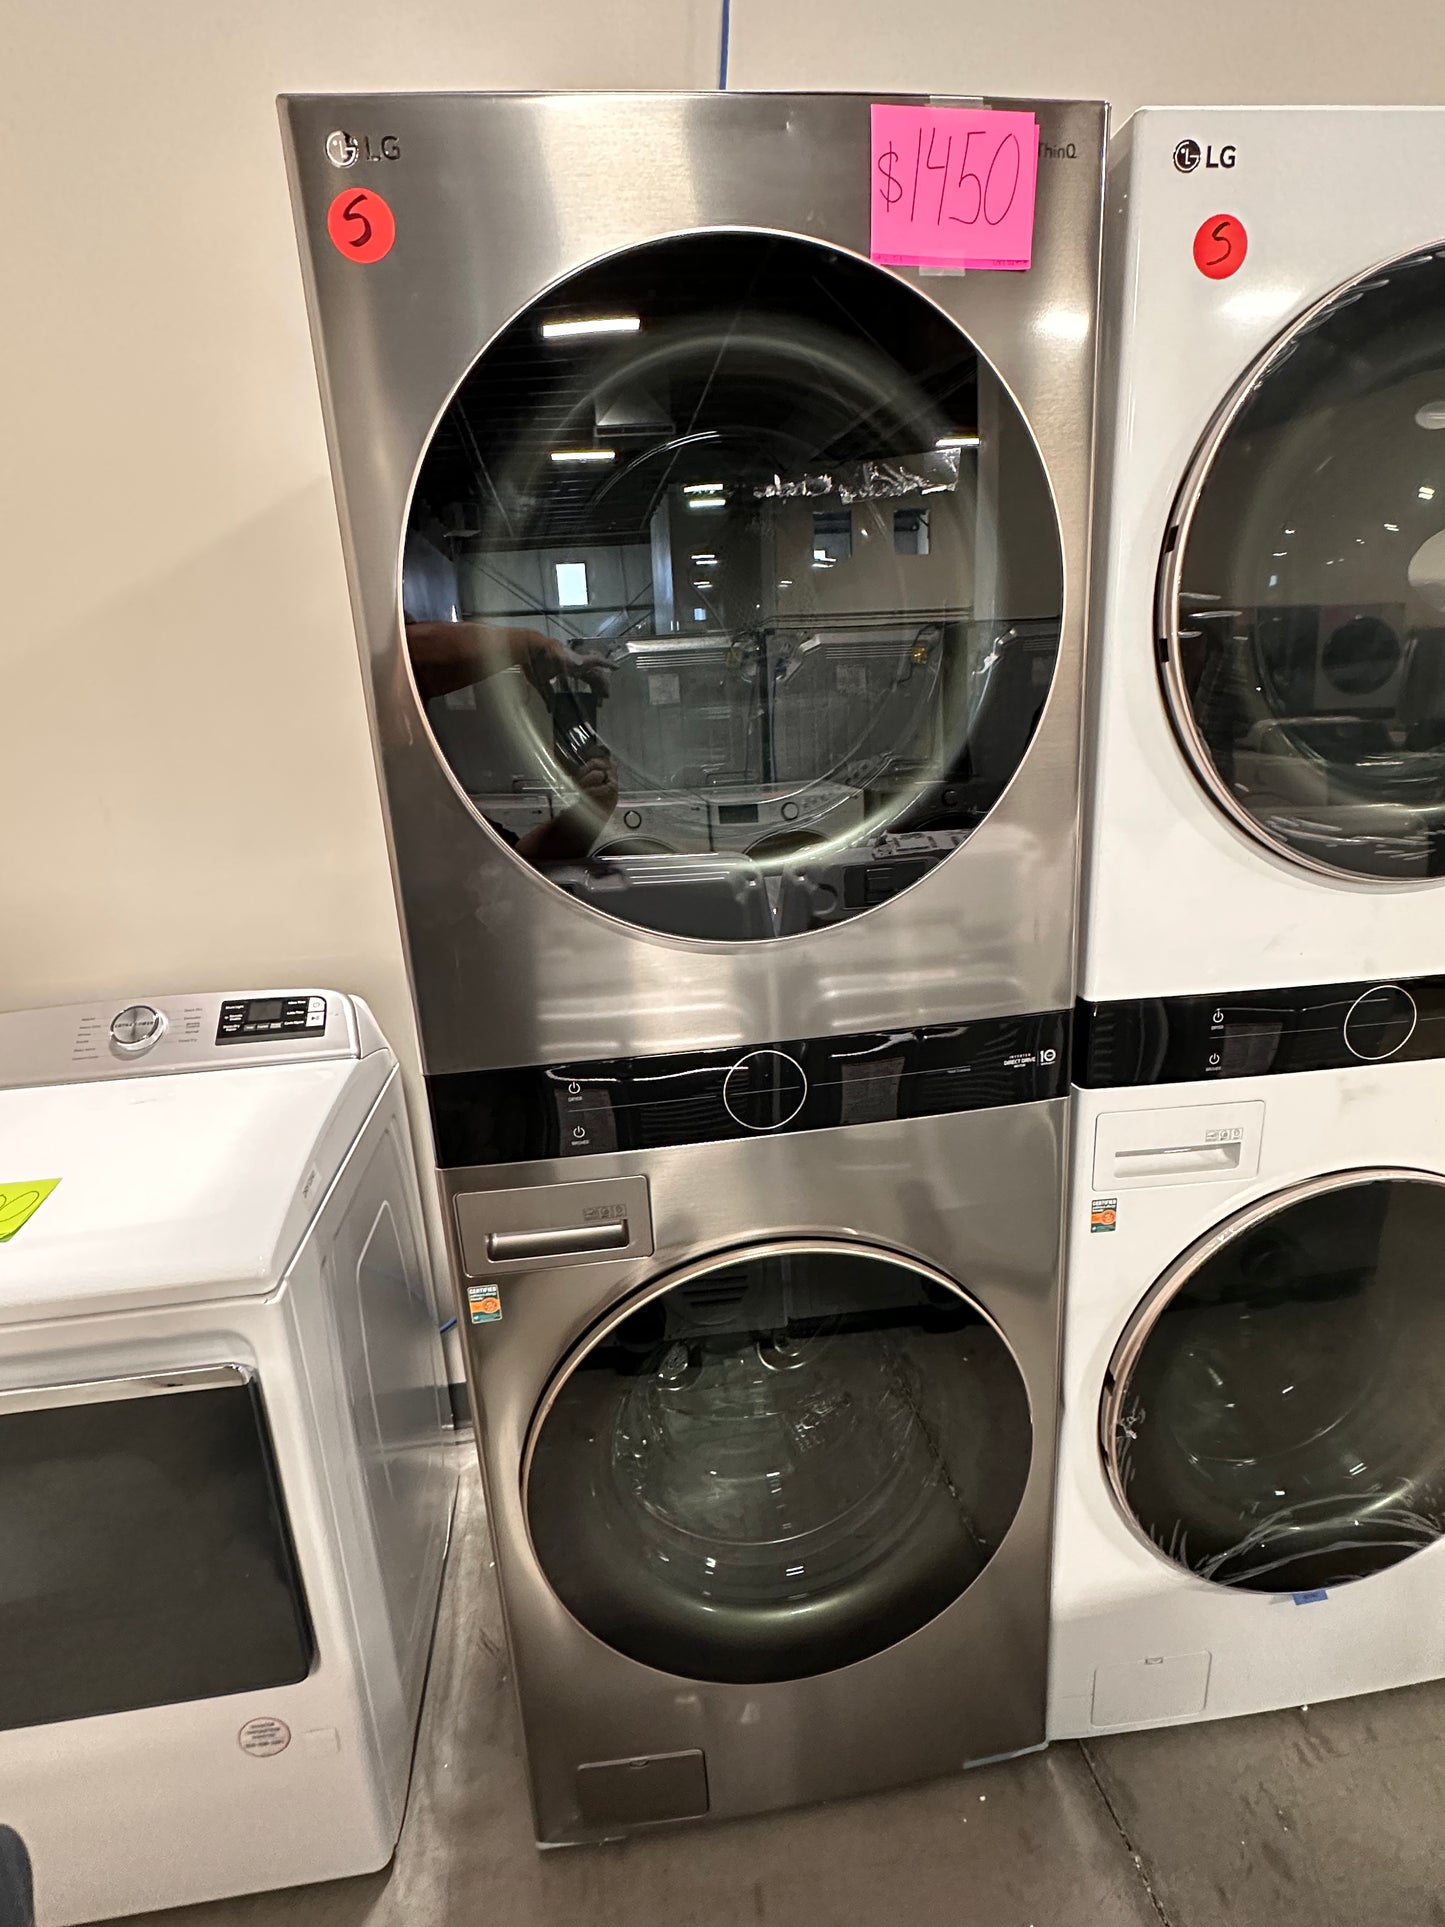 BRAND NEW LG WASHTOWER - ELECTRIC DRYER FRONT LOAD WASHER - WAS12518